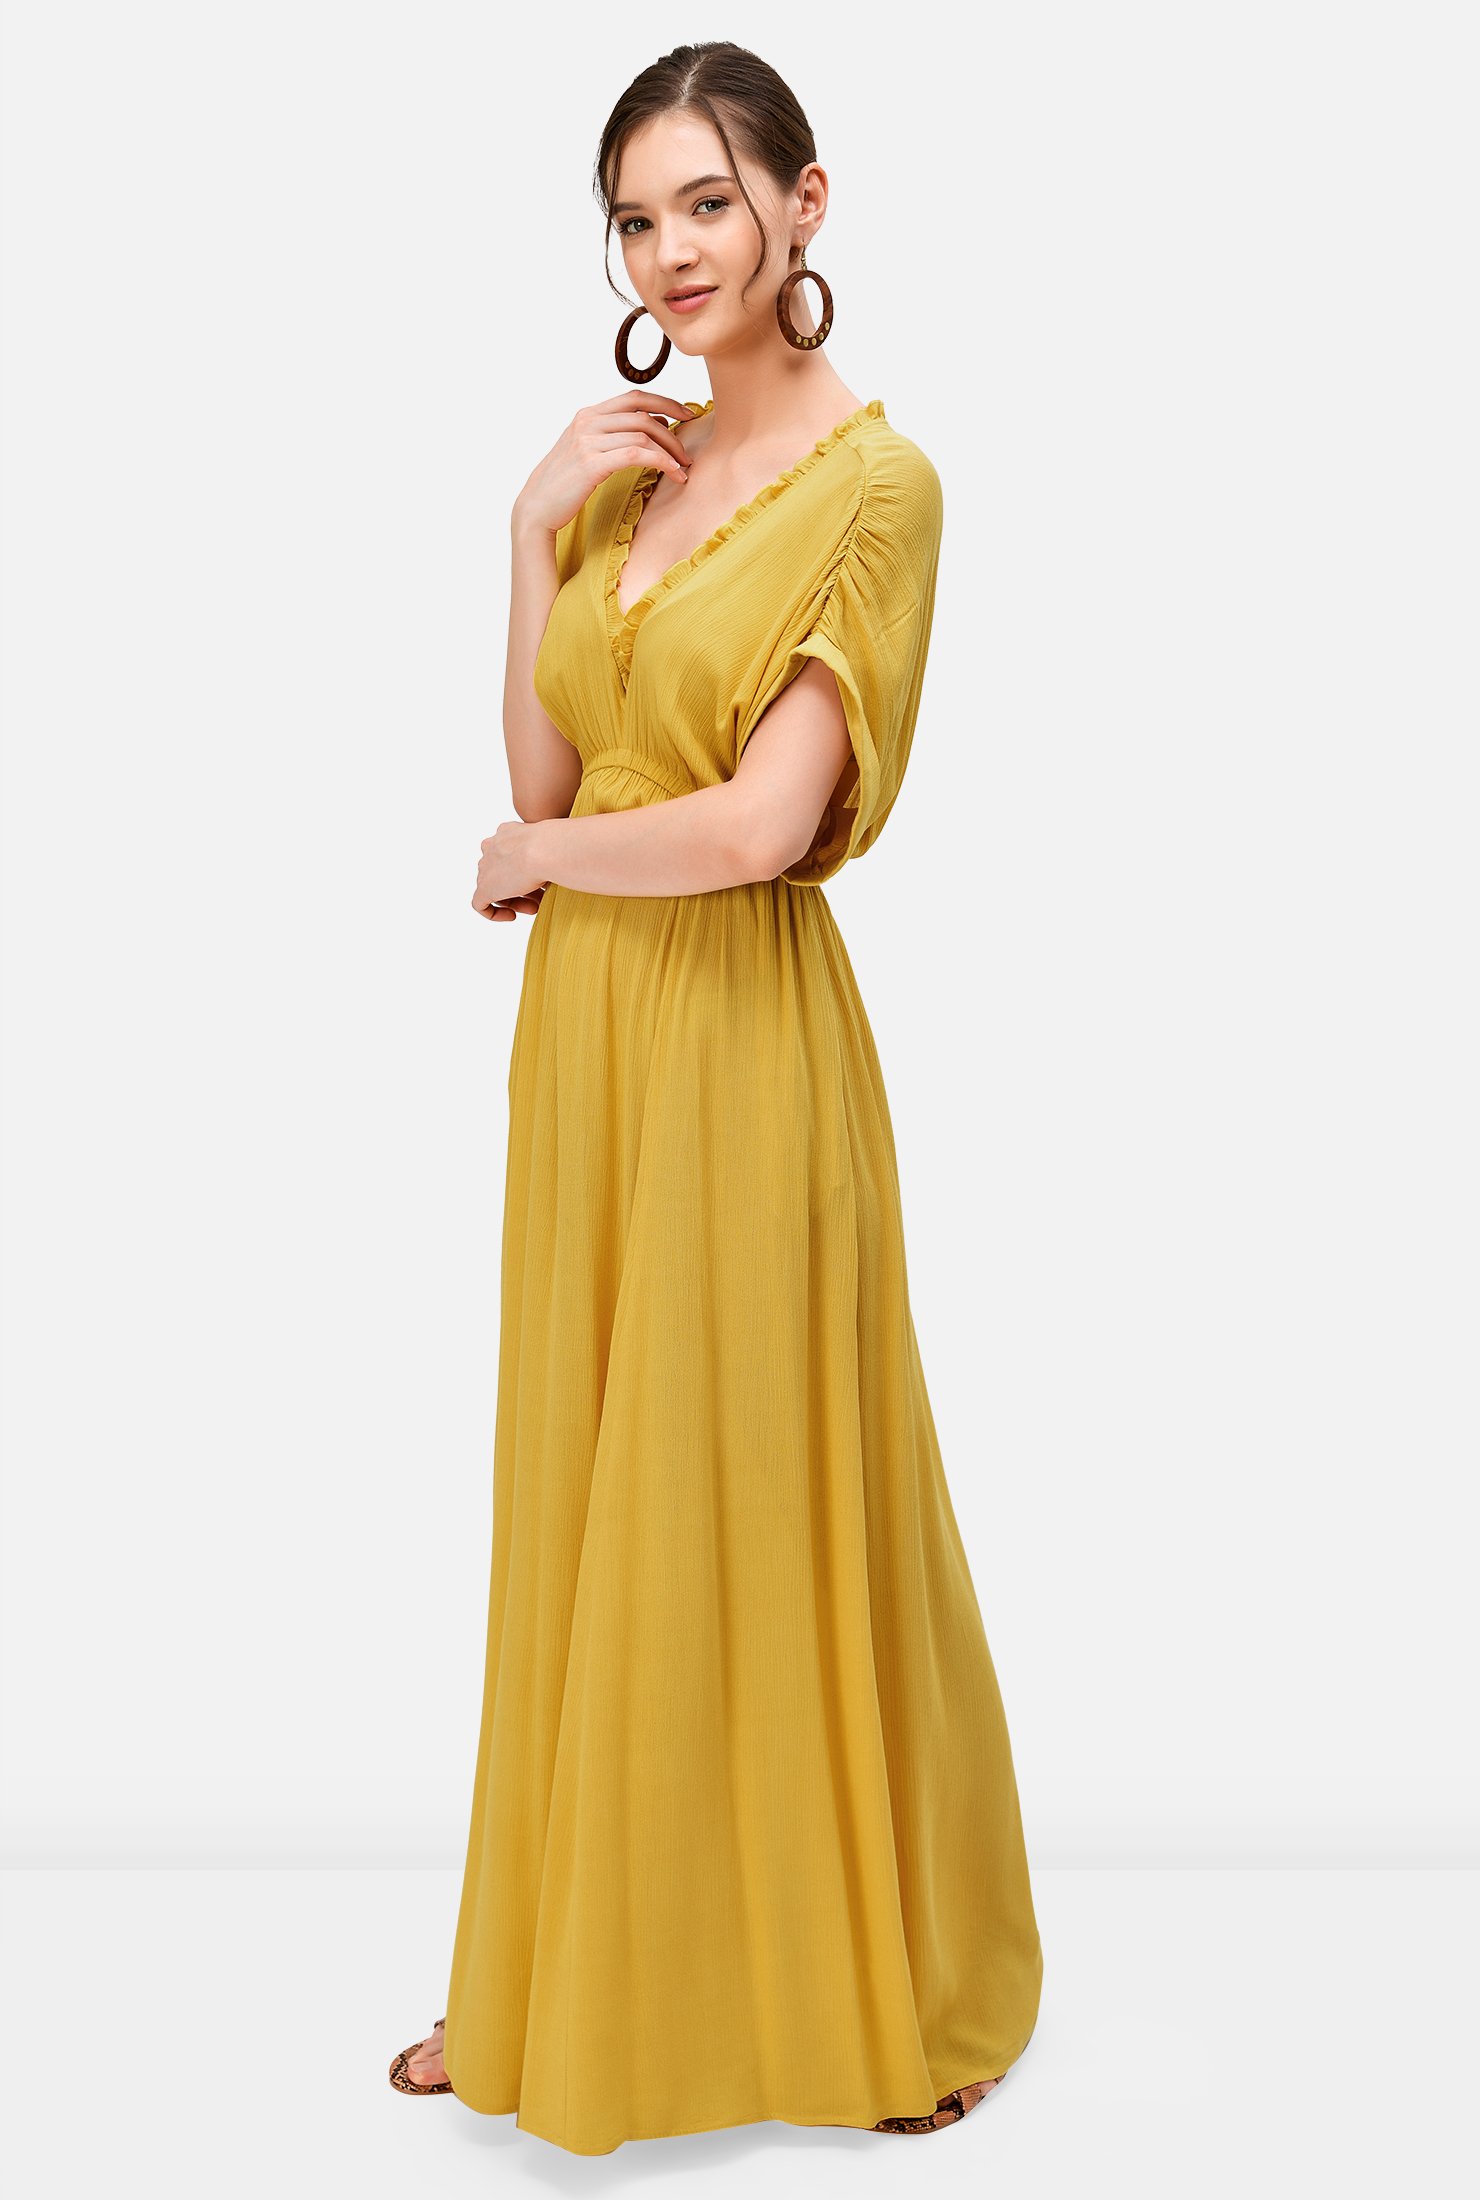 Look forward to warm weather and sunshine in our light crinkle maxi dress trimmed with ruffle frills at the neckline and elasticated at the shoulders and empire waist for soft texture.  